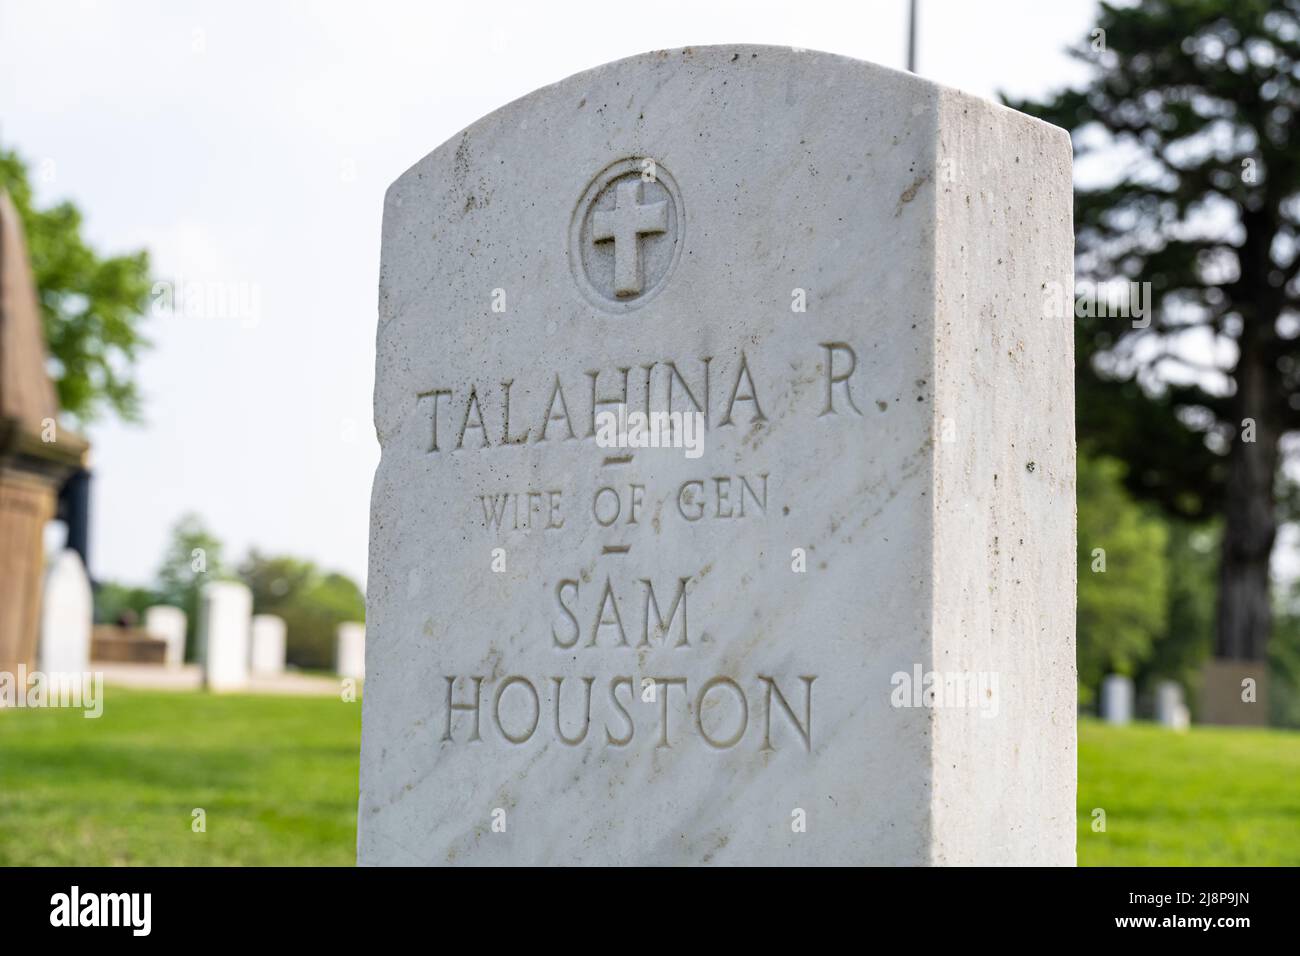 Headstone for Talahina Rogers (1799-1839), Cherokee wife of General Sam Houston, at Fort Gibson National Cemetery in Fort Gibson, Oklahoma. (USA) Stock Photo